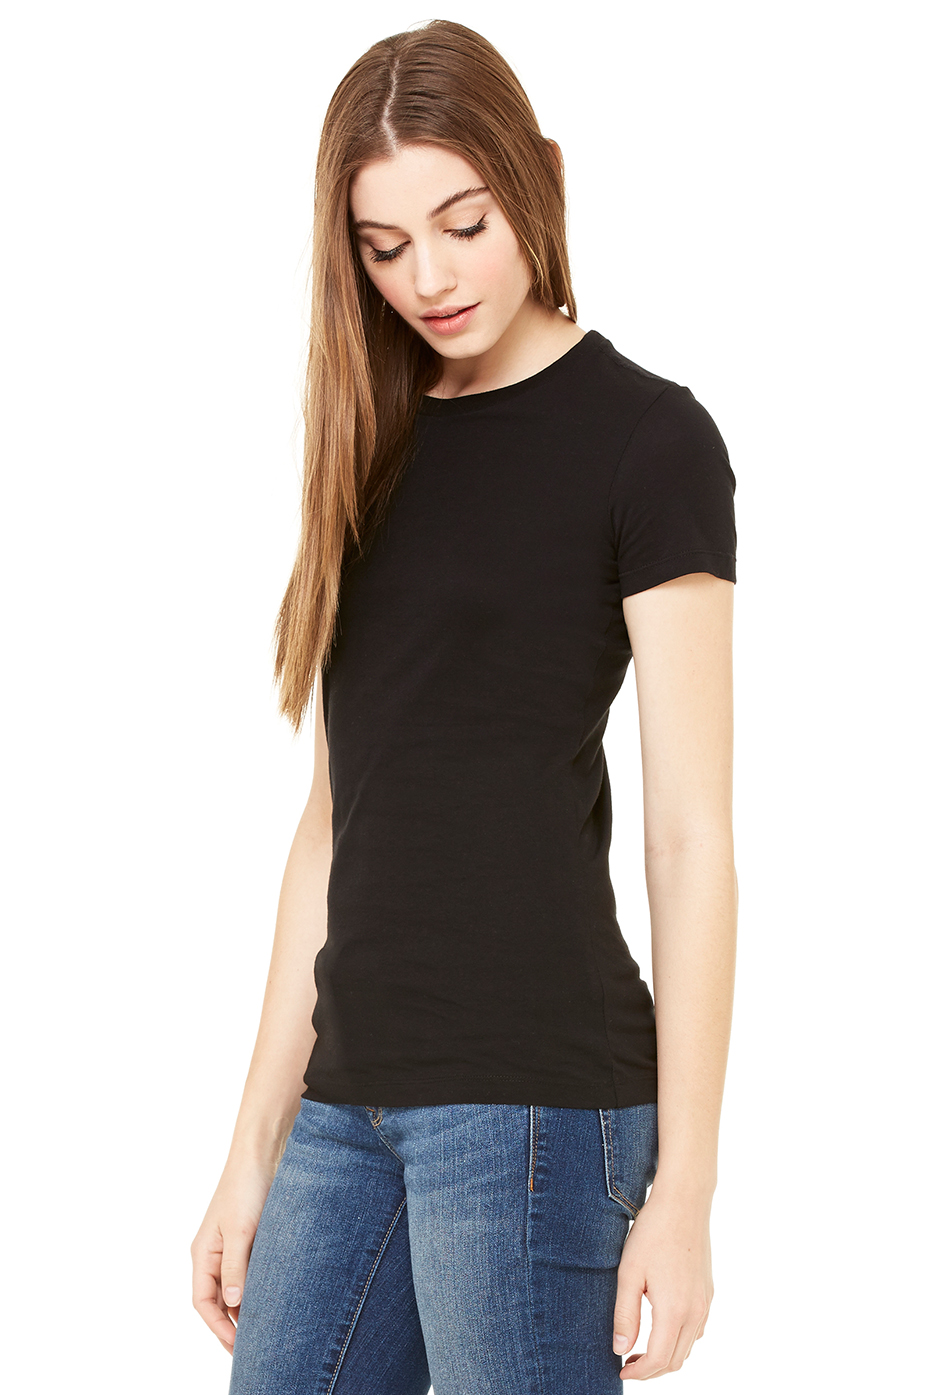 Women's Made in the USA Favorite Tee | Bella-Canvas